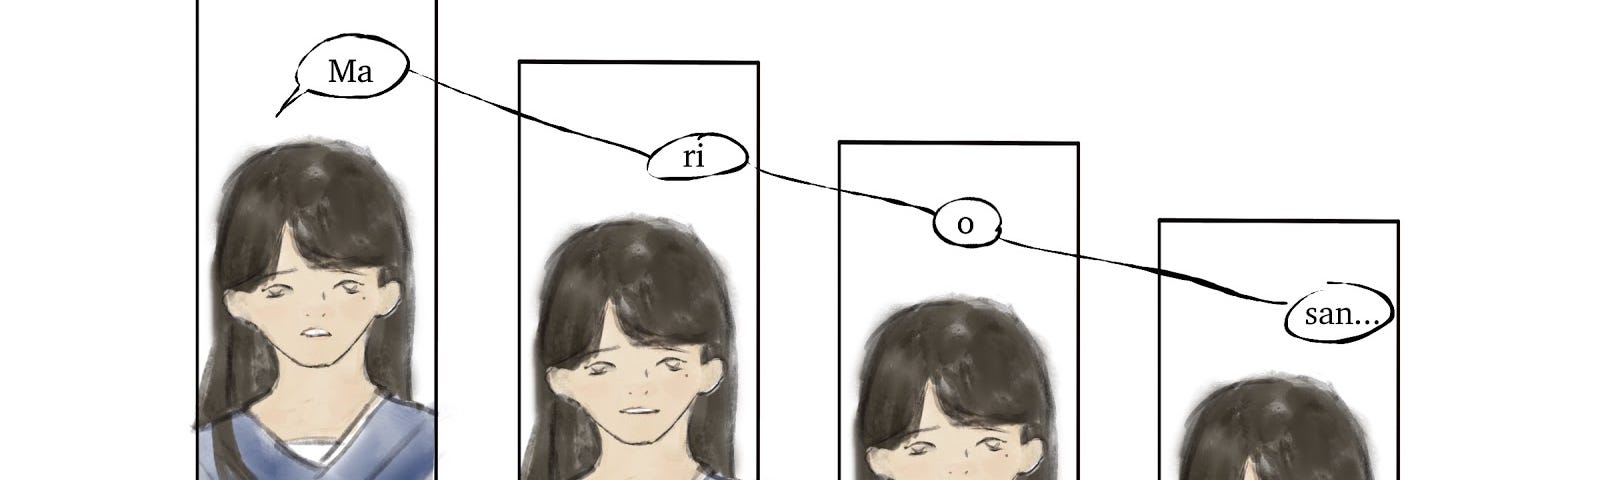 Image features four panels descending diagonally, with the same illustrated person in all four. The person has long hair and is wearing a blue sailor uniform, and says “Ma — Ri — O — San” respectively in each panel.